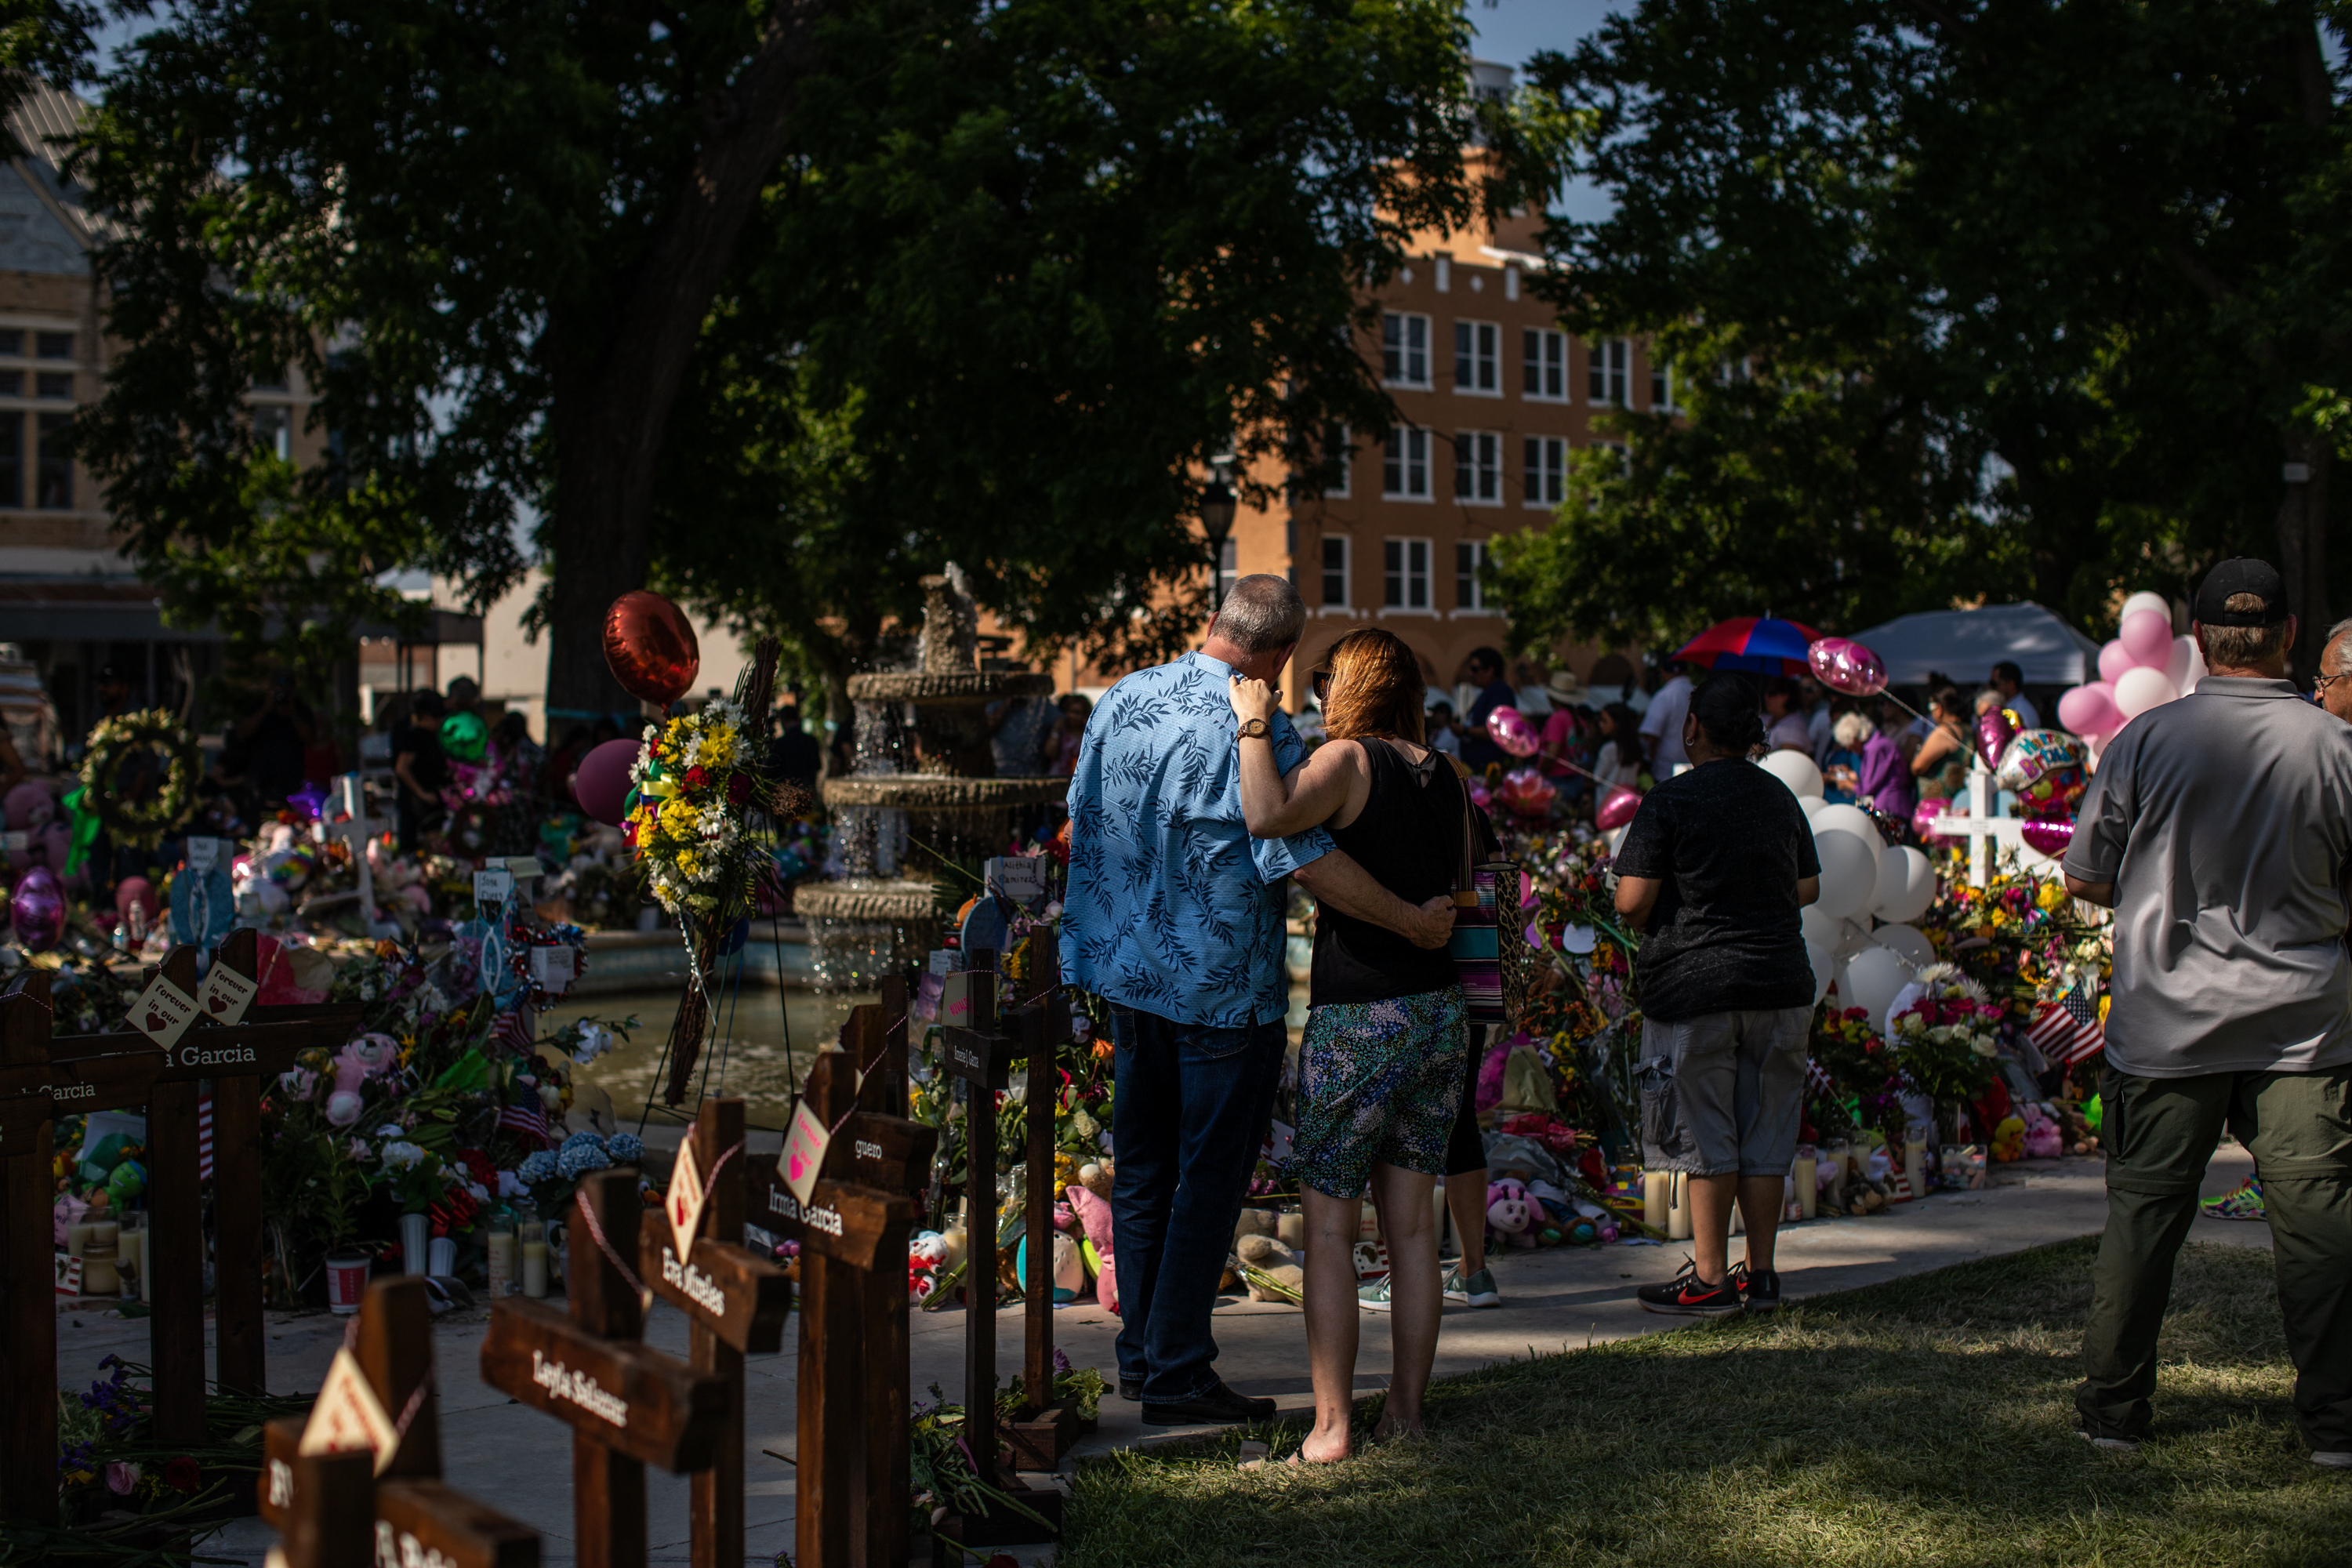 Thousands of roses, handwritten notes, hundreds of candles and dozens of stuffed animals surround a fountain in the center of the City of Uvalde Town Square on May 29, 2022.